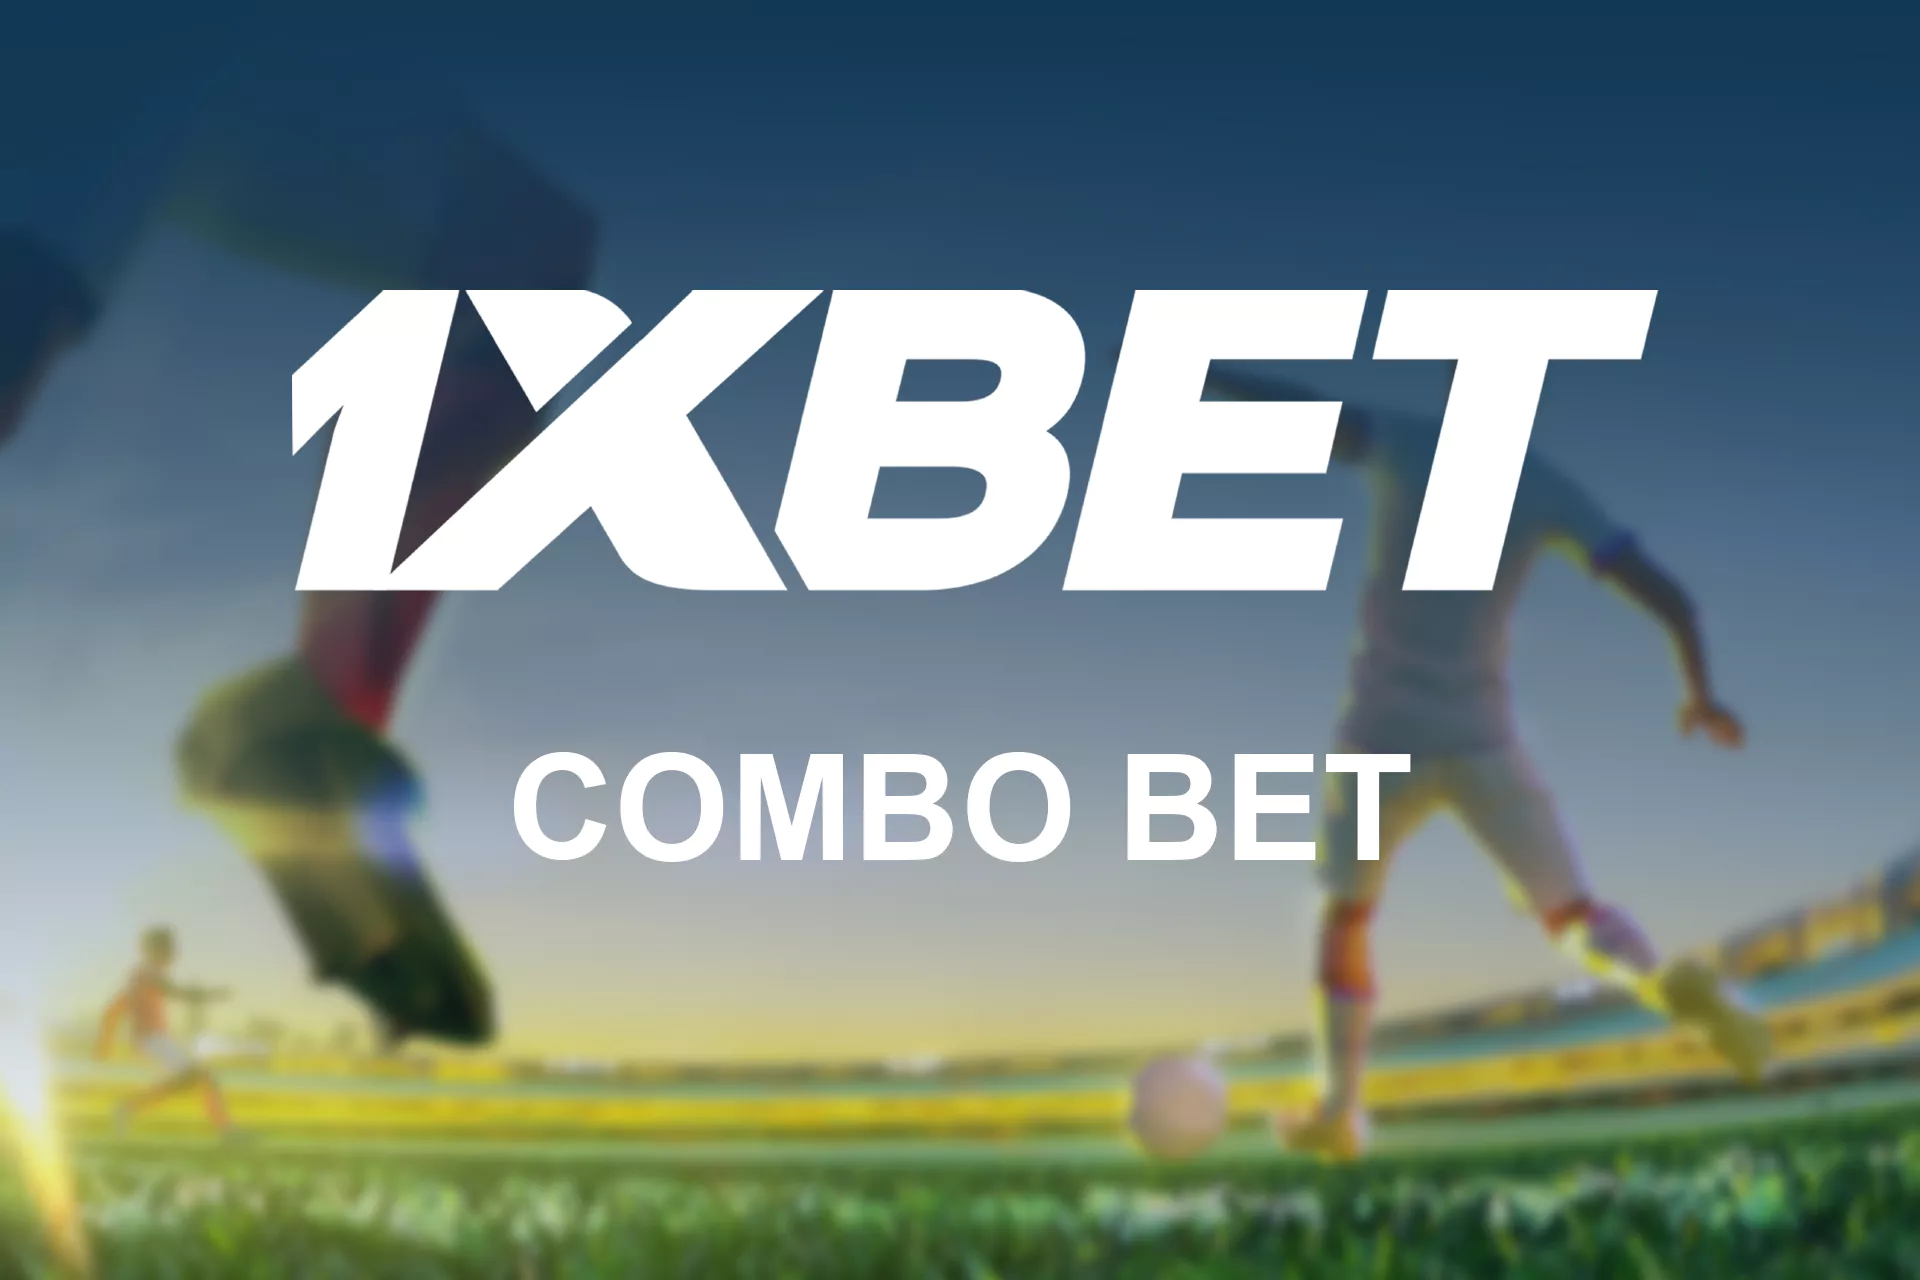 Place a combo bet on the official 1xBet website in Bangladesh.